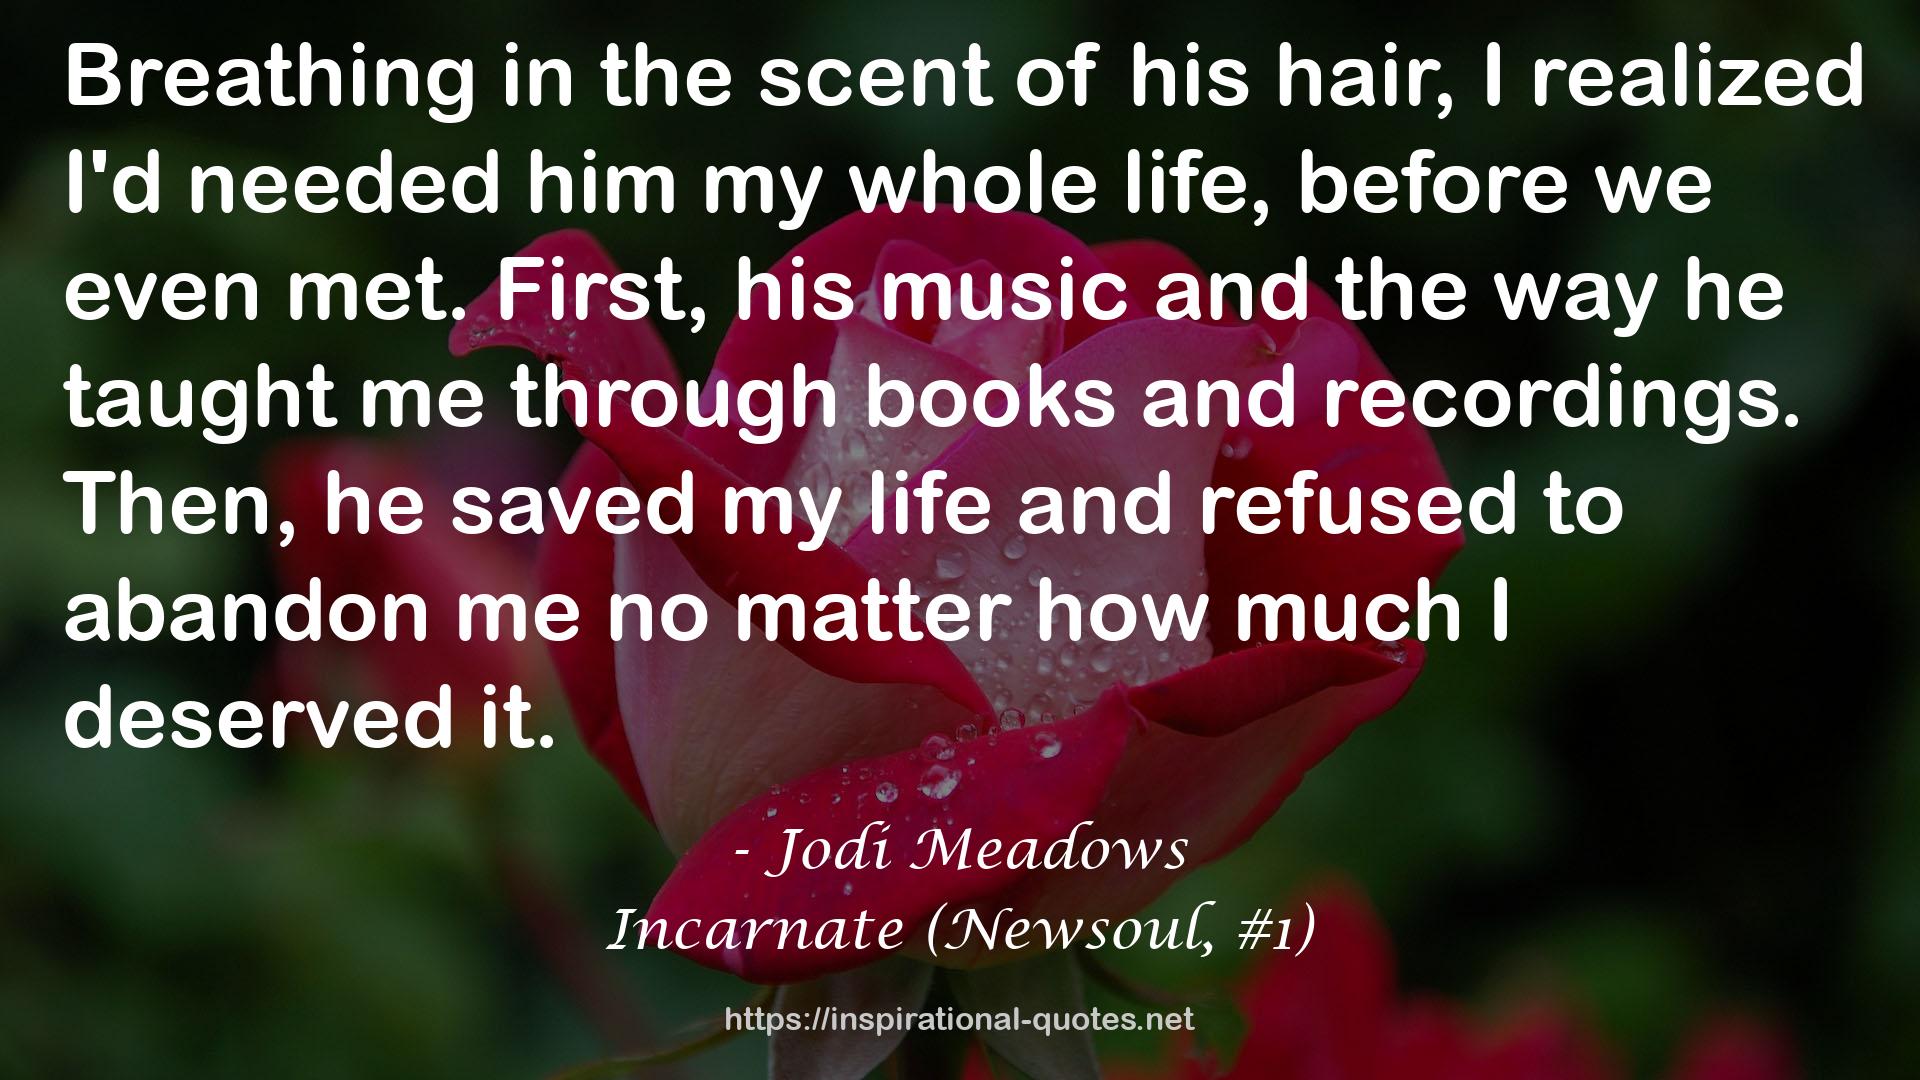 Incarnate (Newsoul, #1) QUOTES